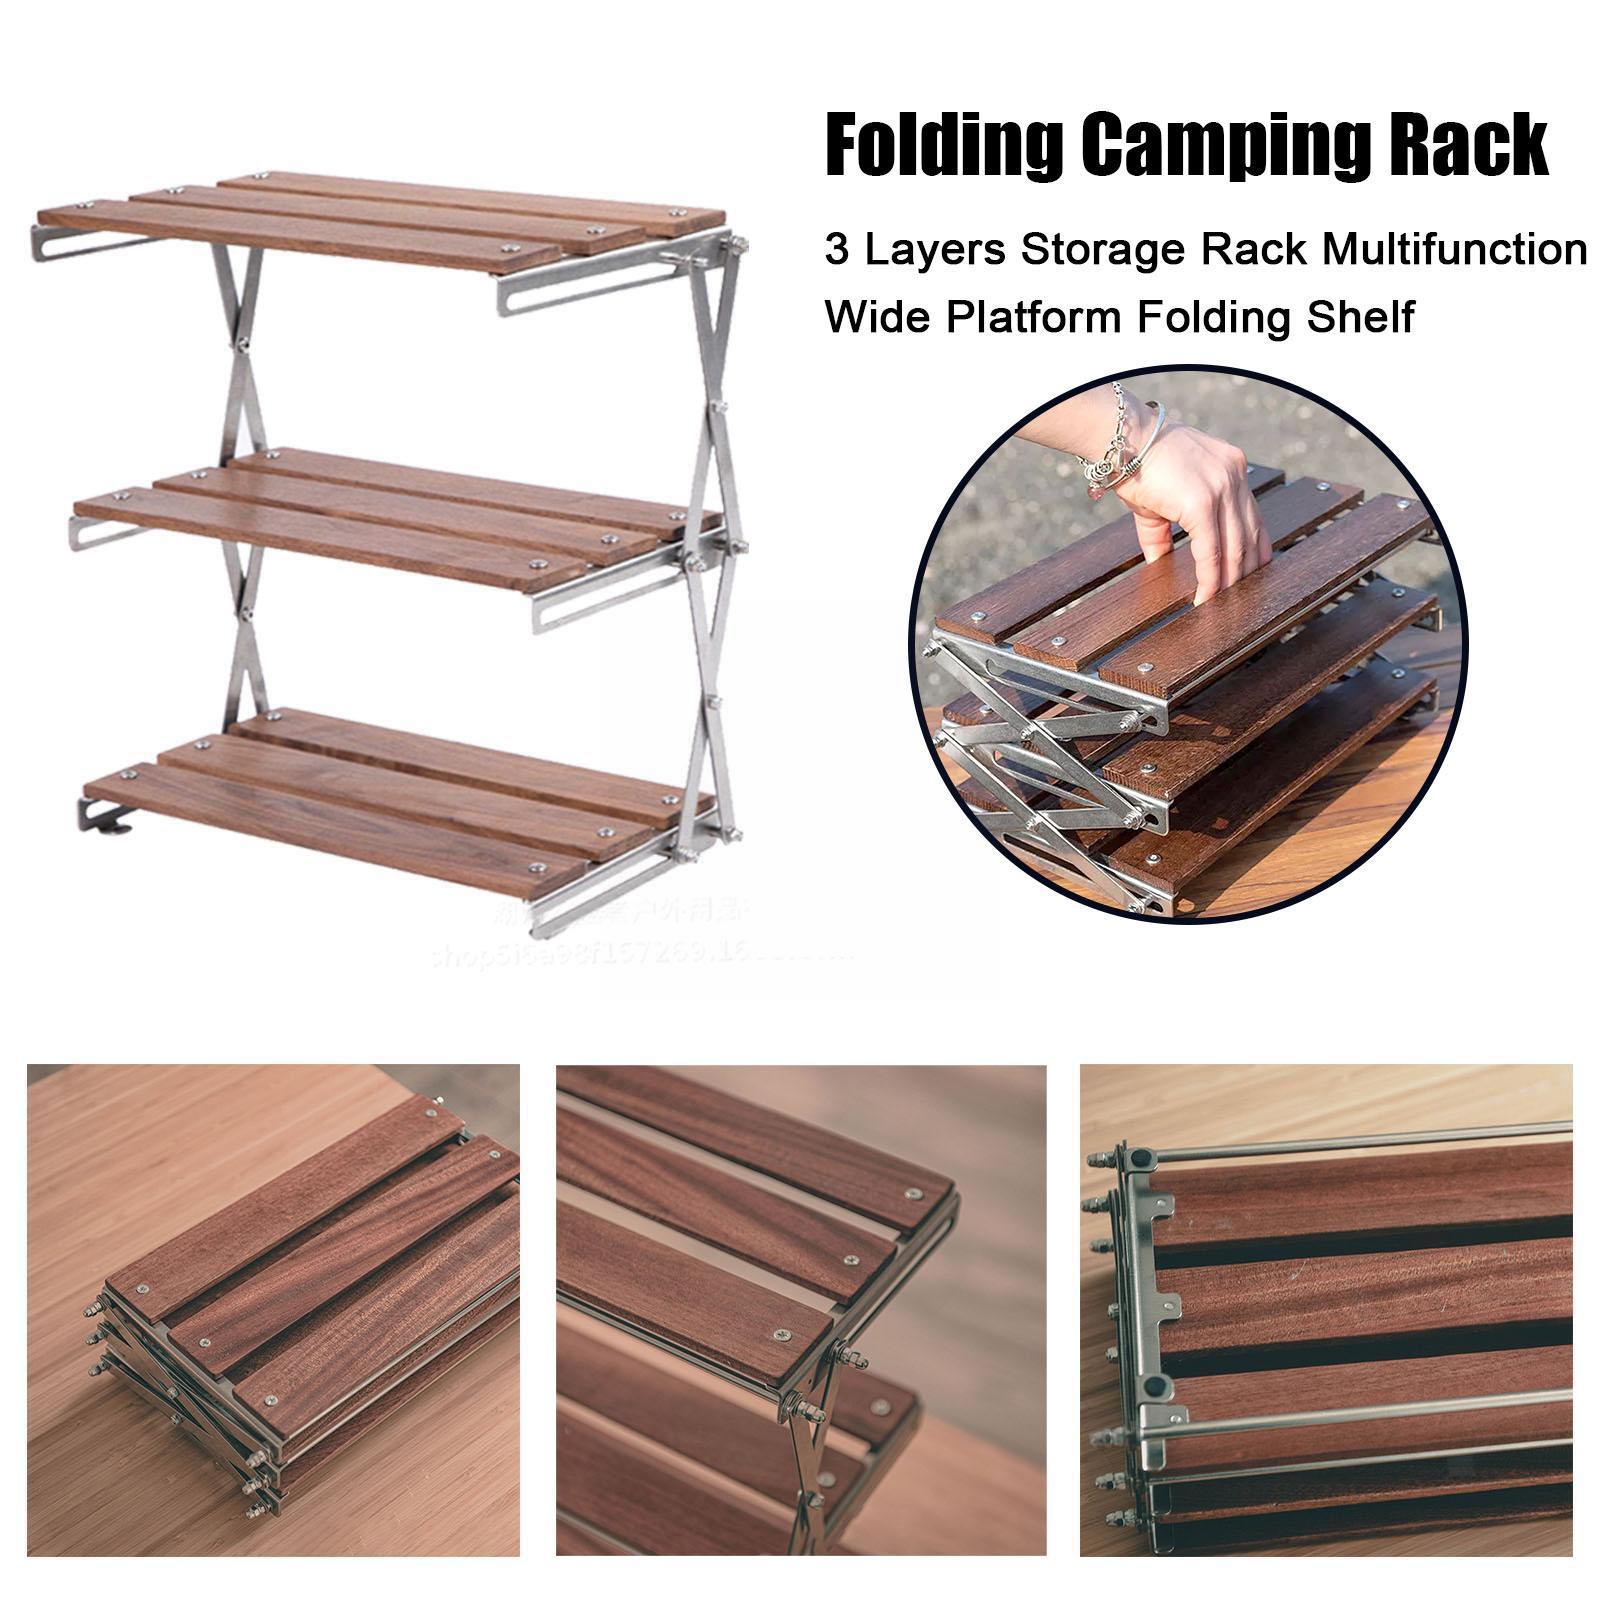 3-Layer Compact Foldable Storage Rack - UTILITY5STORE